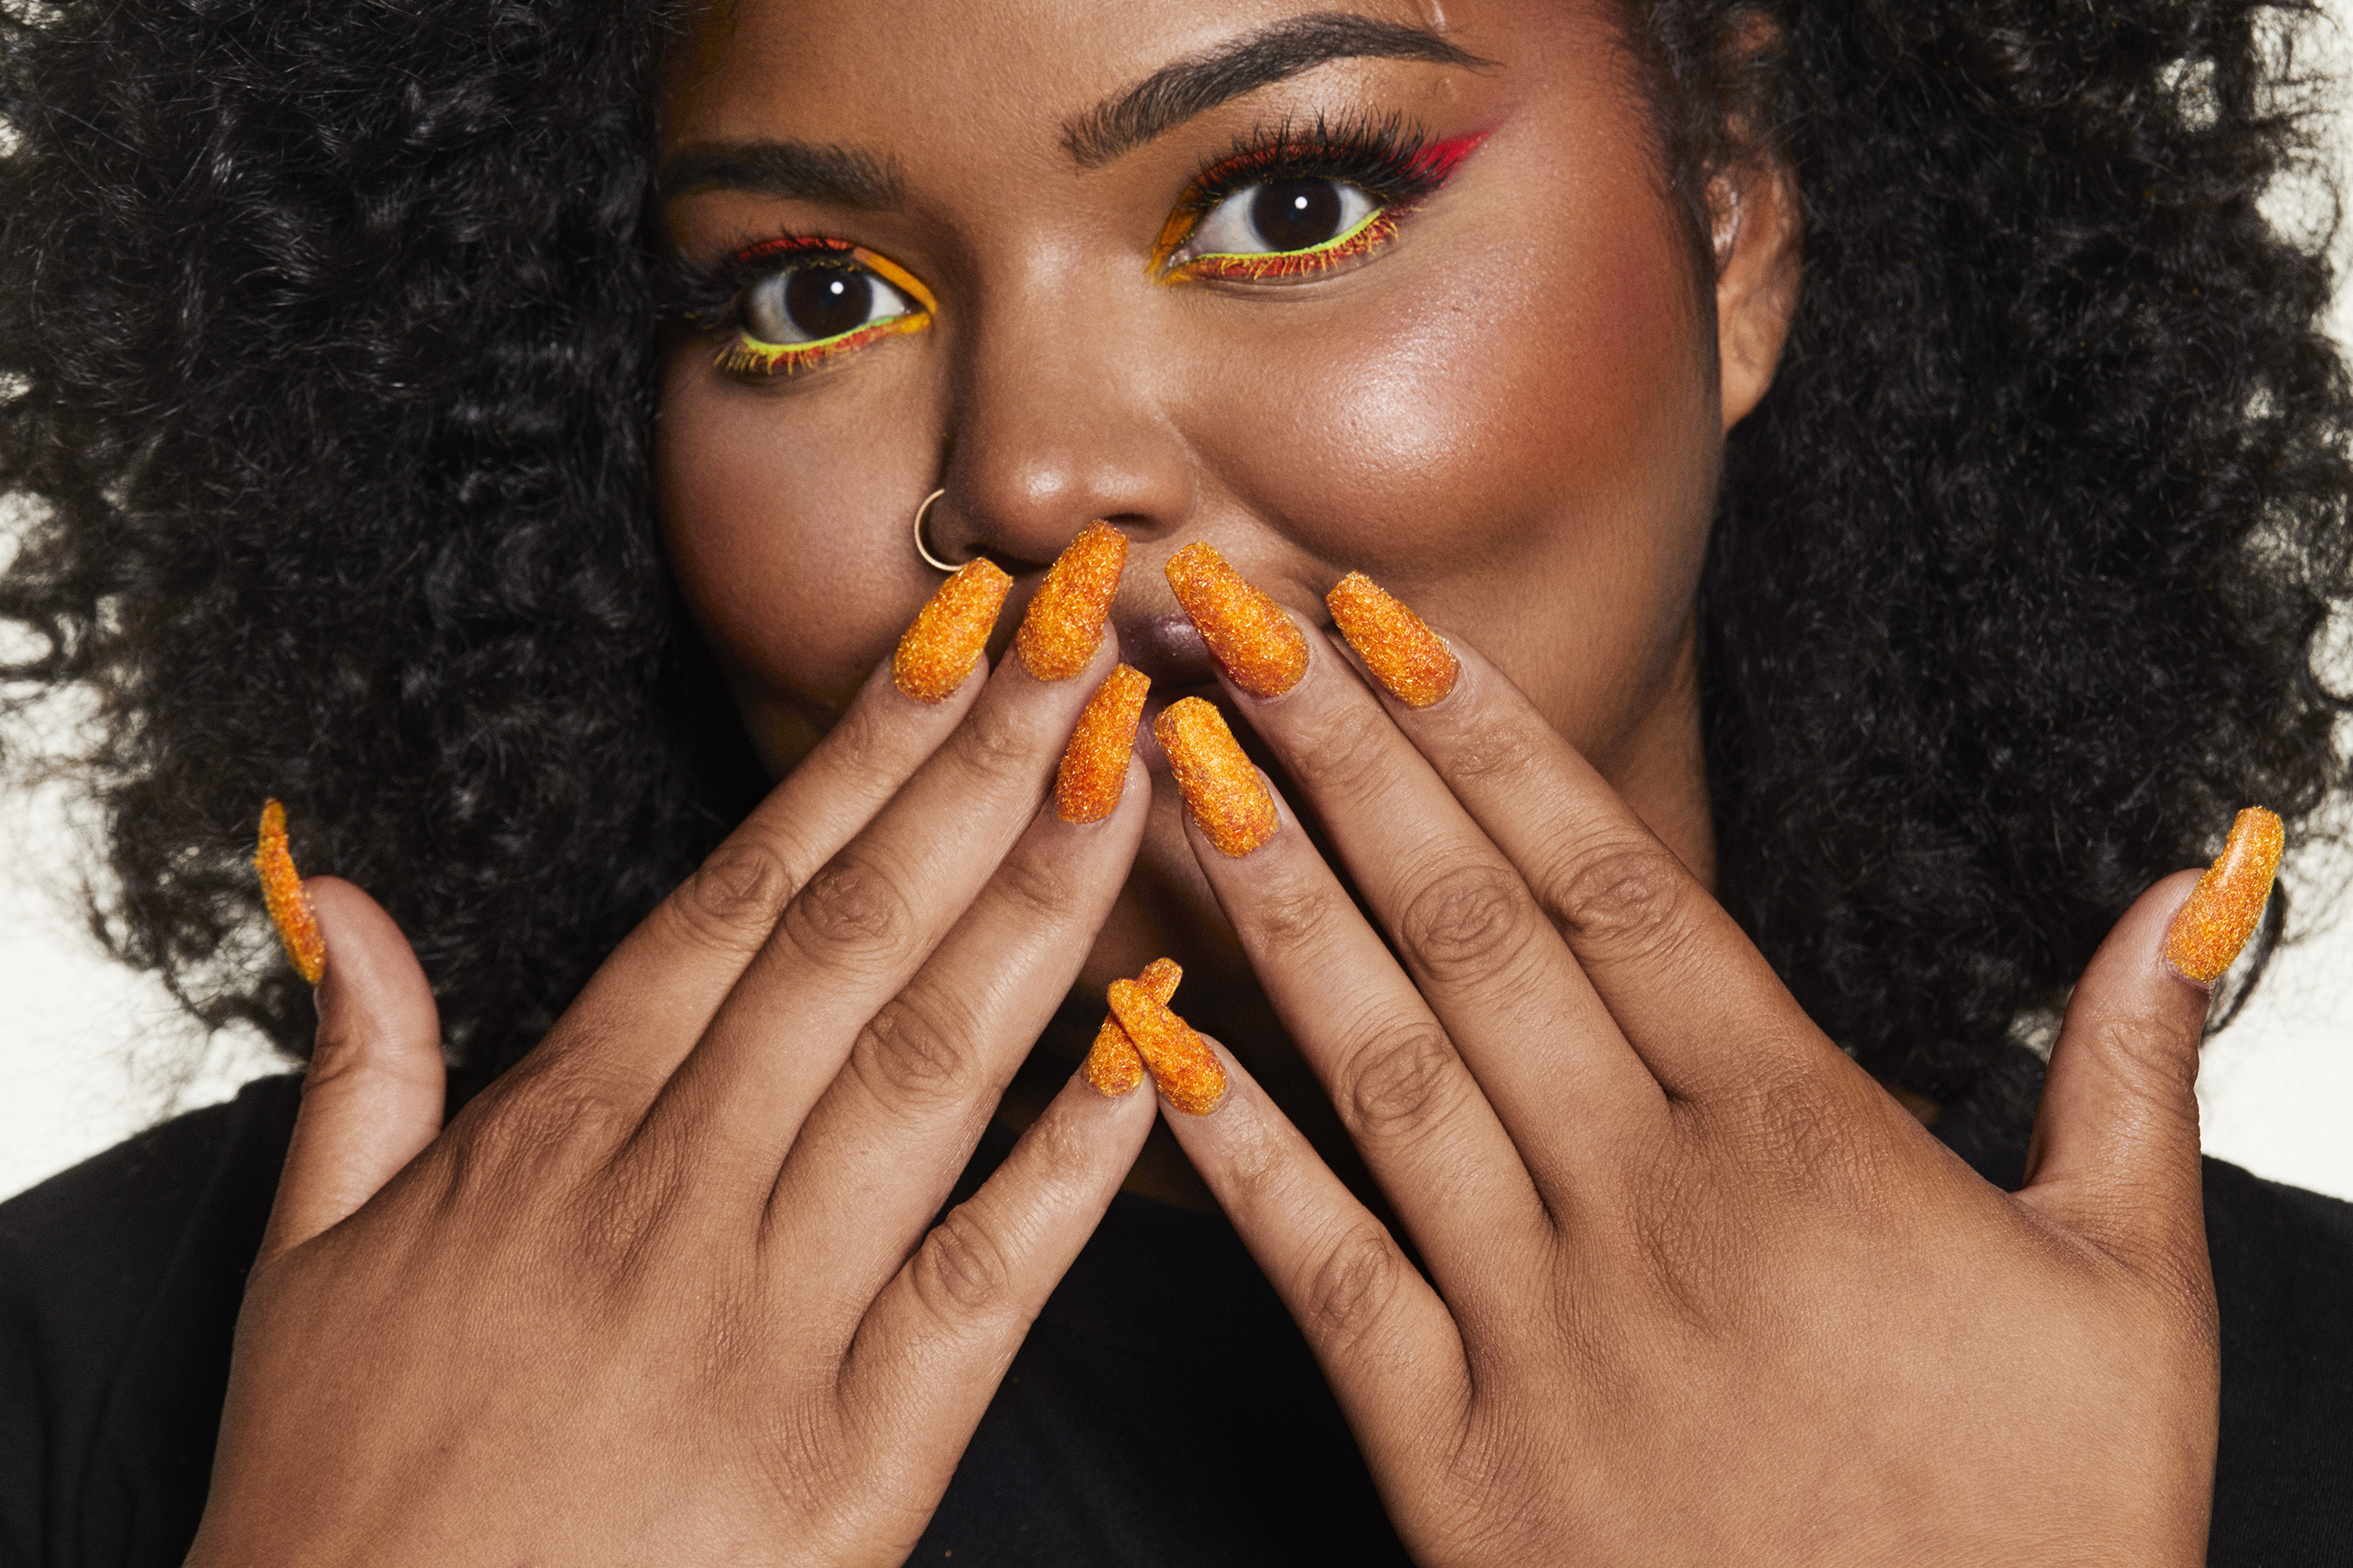 Cheetos puts its orange-dusted fingerprints all over fashion and beauty world with "House of Flamin' Haute"